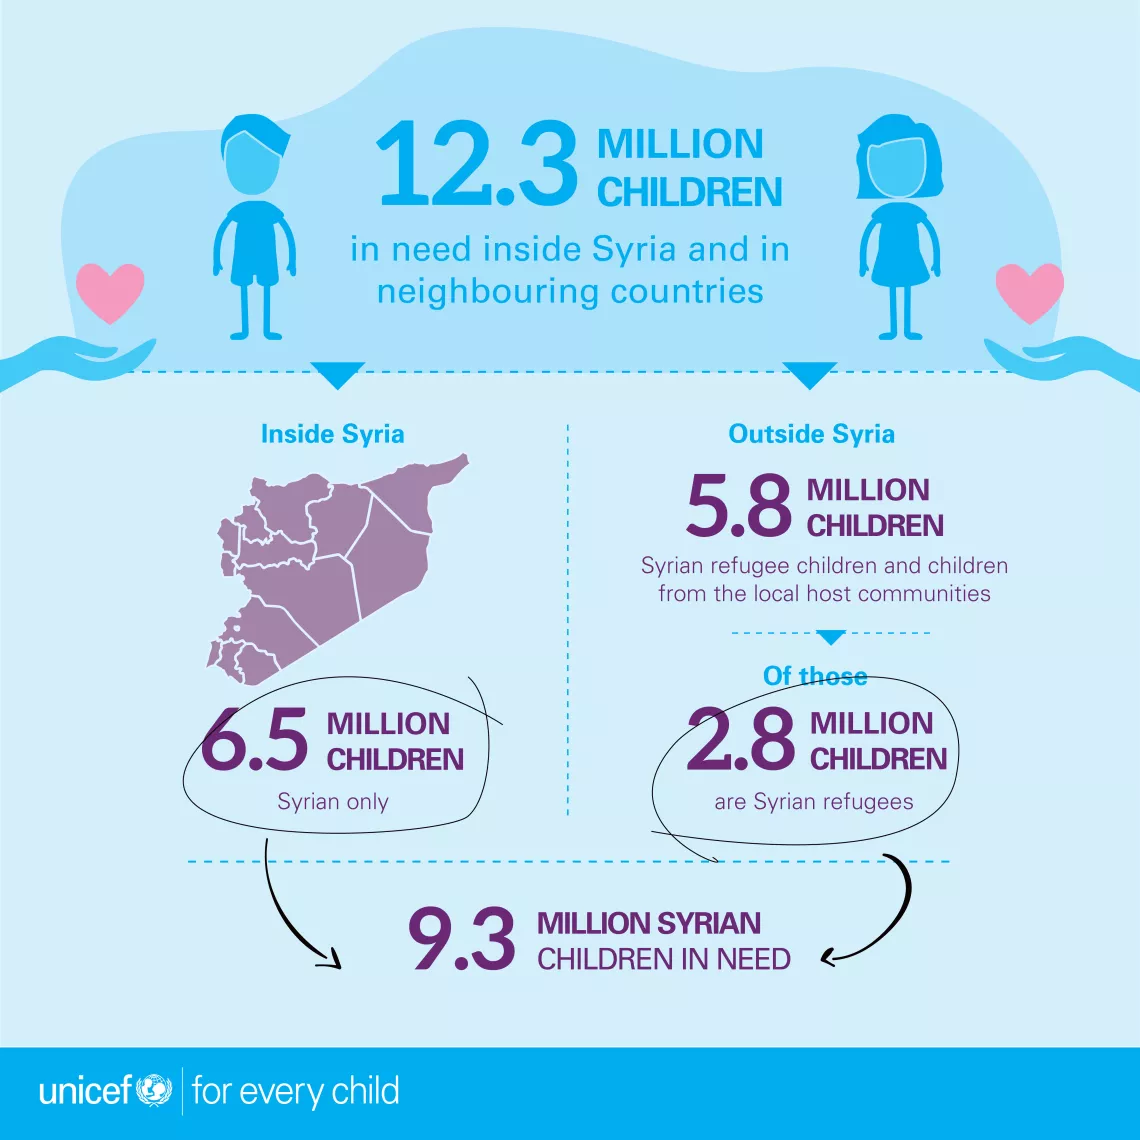 Infographic - 9.3 million Syrian children in need of aid